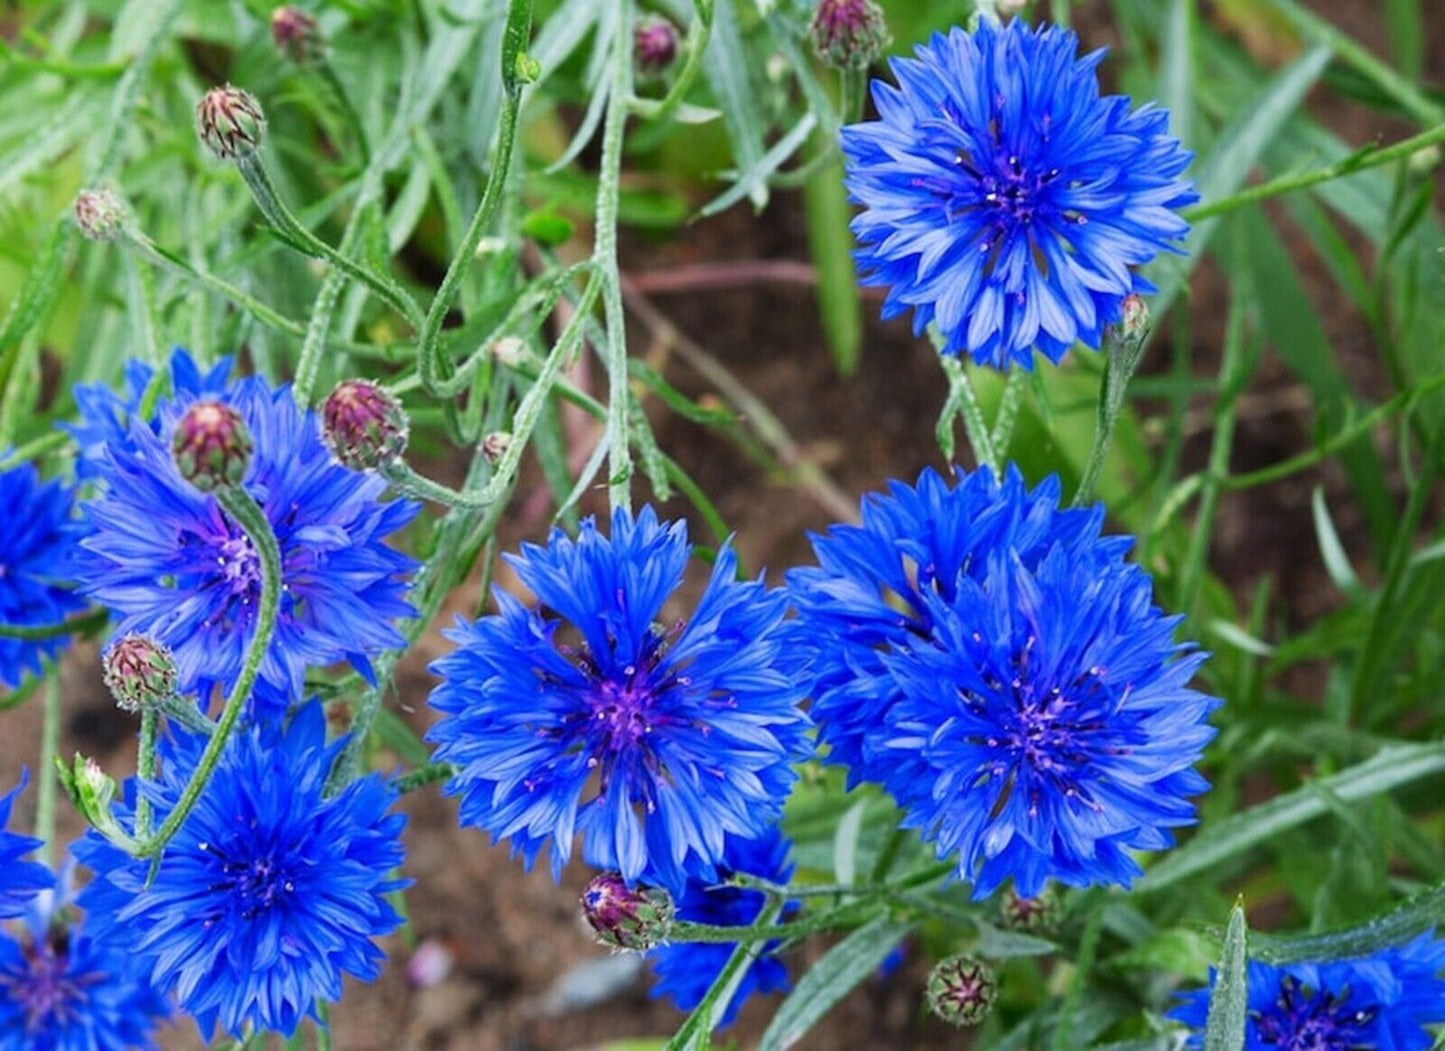 50 Bright Blue Bachelor's Button Seeds Annual Seed Flower Flowers Garden 585 USA